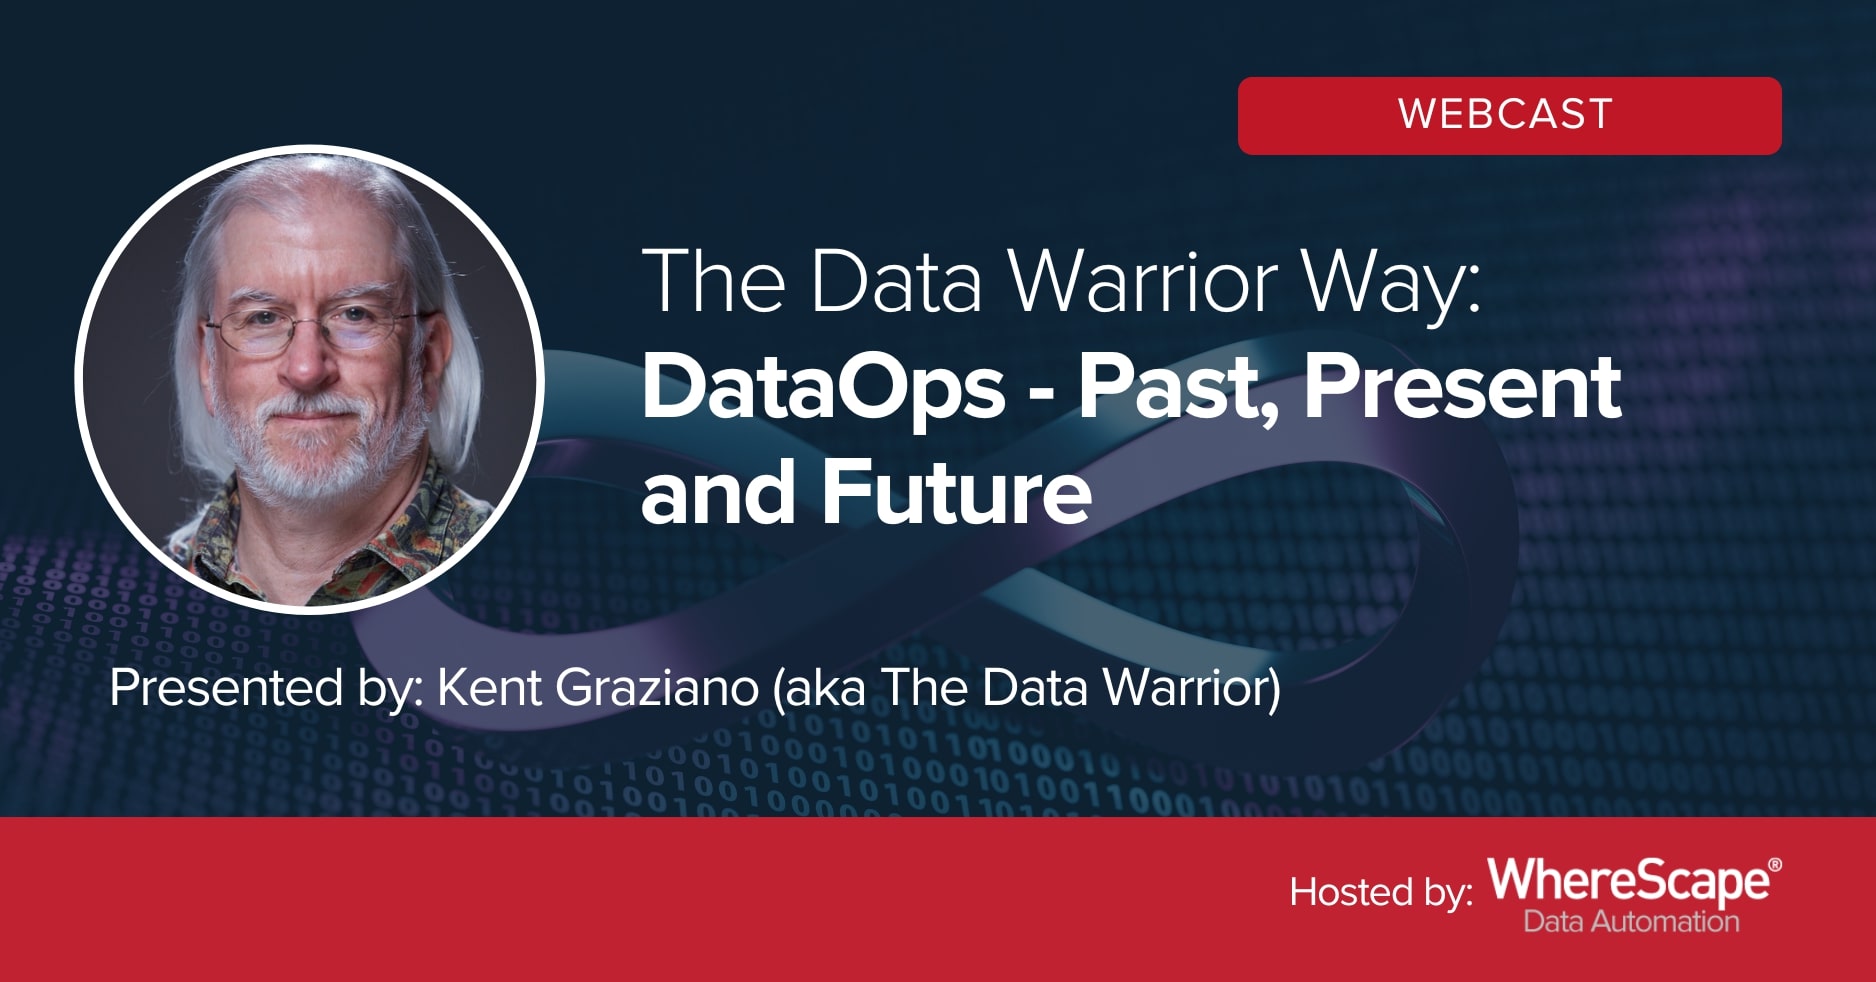 Webcast: DataOps - Past, Present, and Future by Kent Graziano